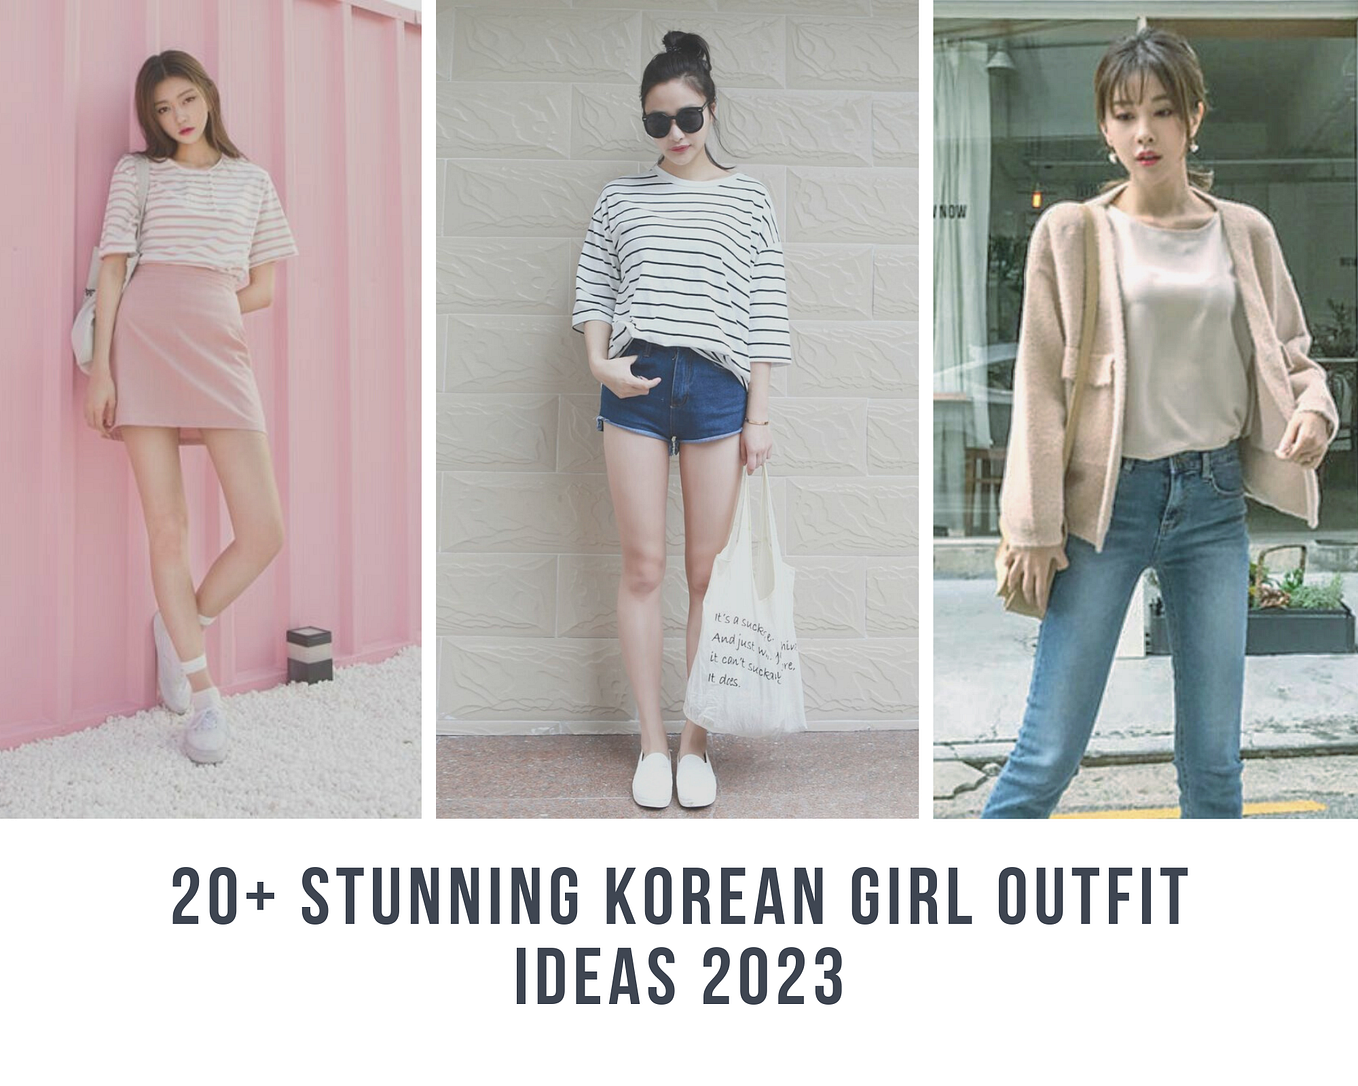 Korean Fashion Stater Kit: 10 Outfits To Ace The Aesthetic